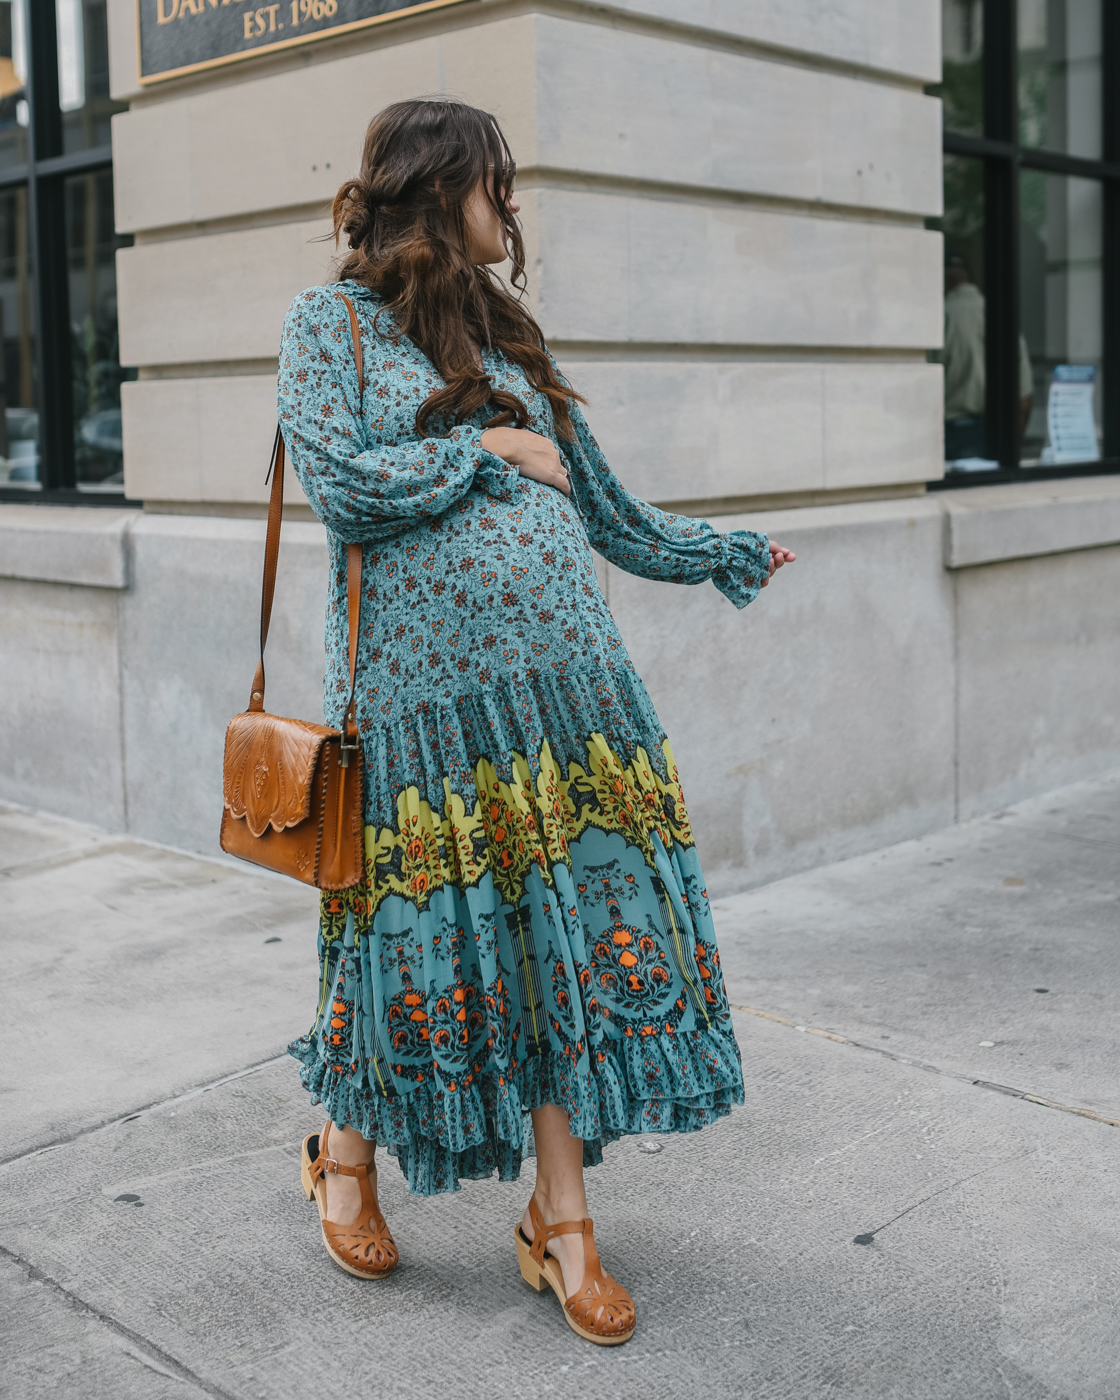 Fall Clothing by popular Memphis fashion blog, Lone Star Looking Glass: image of a woman walking down a city sidewalk and wearing a Free People Free People Feeling Groovy Border Printed Maxi Dress, Swedish clogs, and carrying a Patricia Nash Leather Sarola Crossbody.